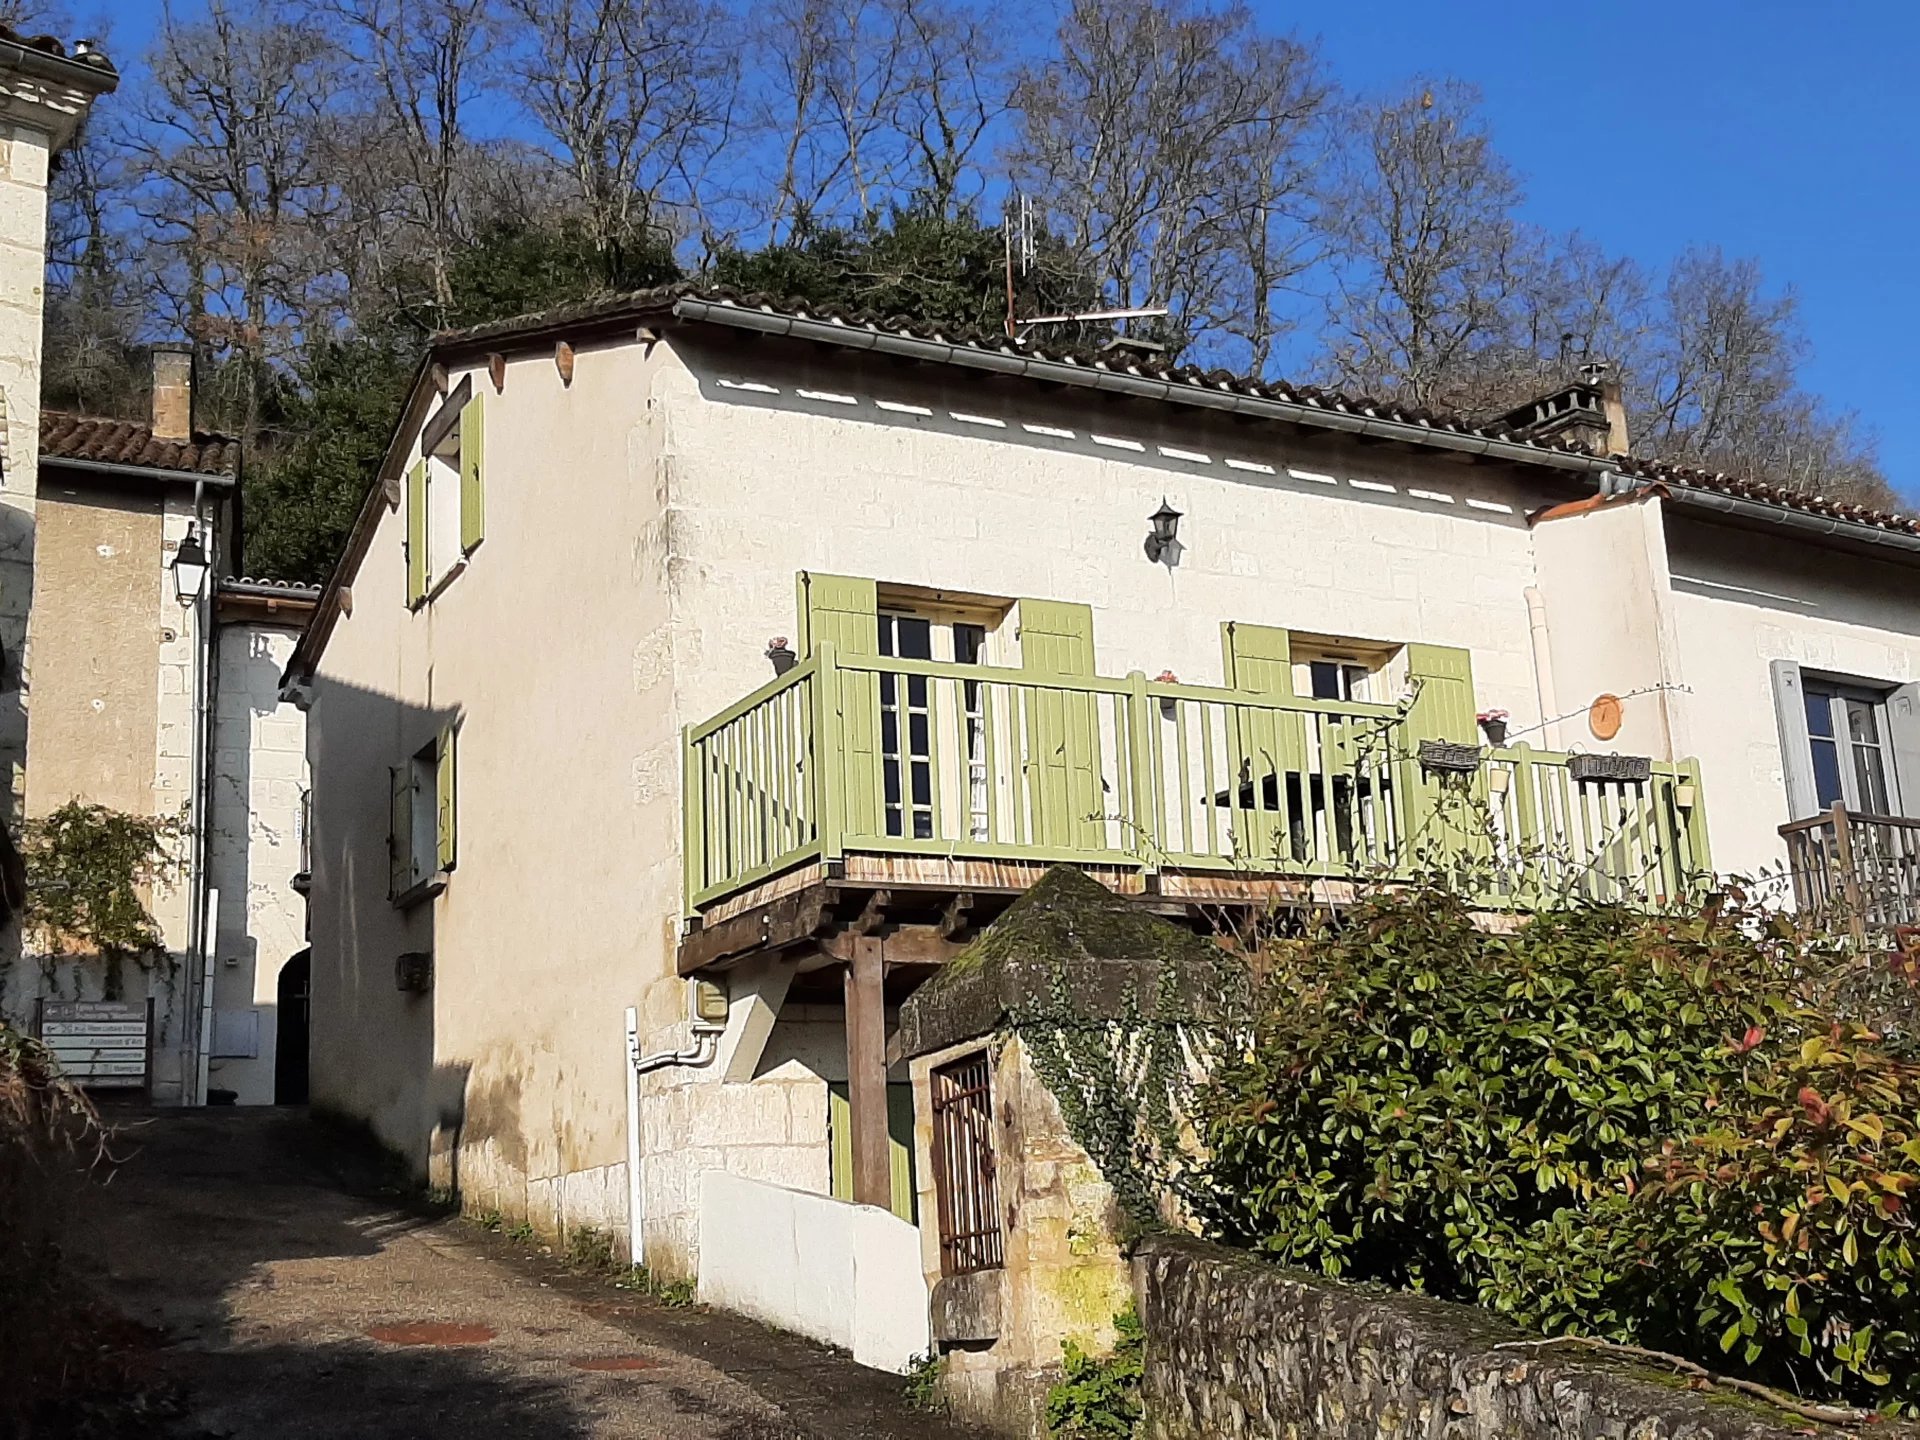 Well appointed village house with sunny balcony overlooking the river